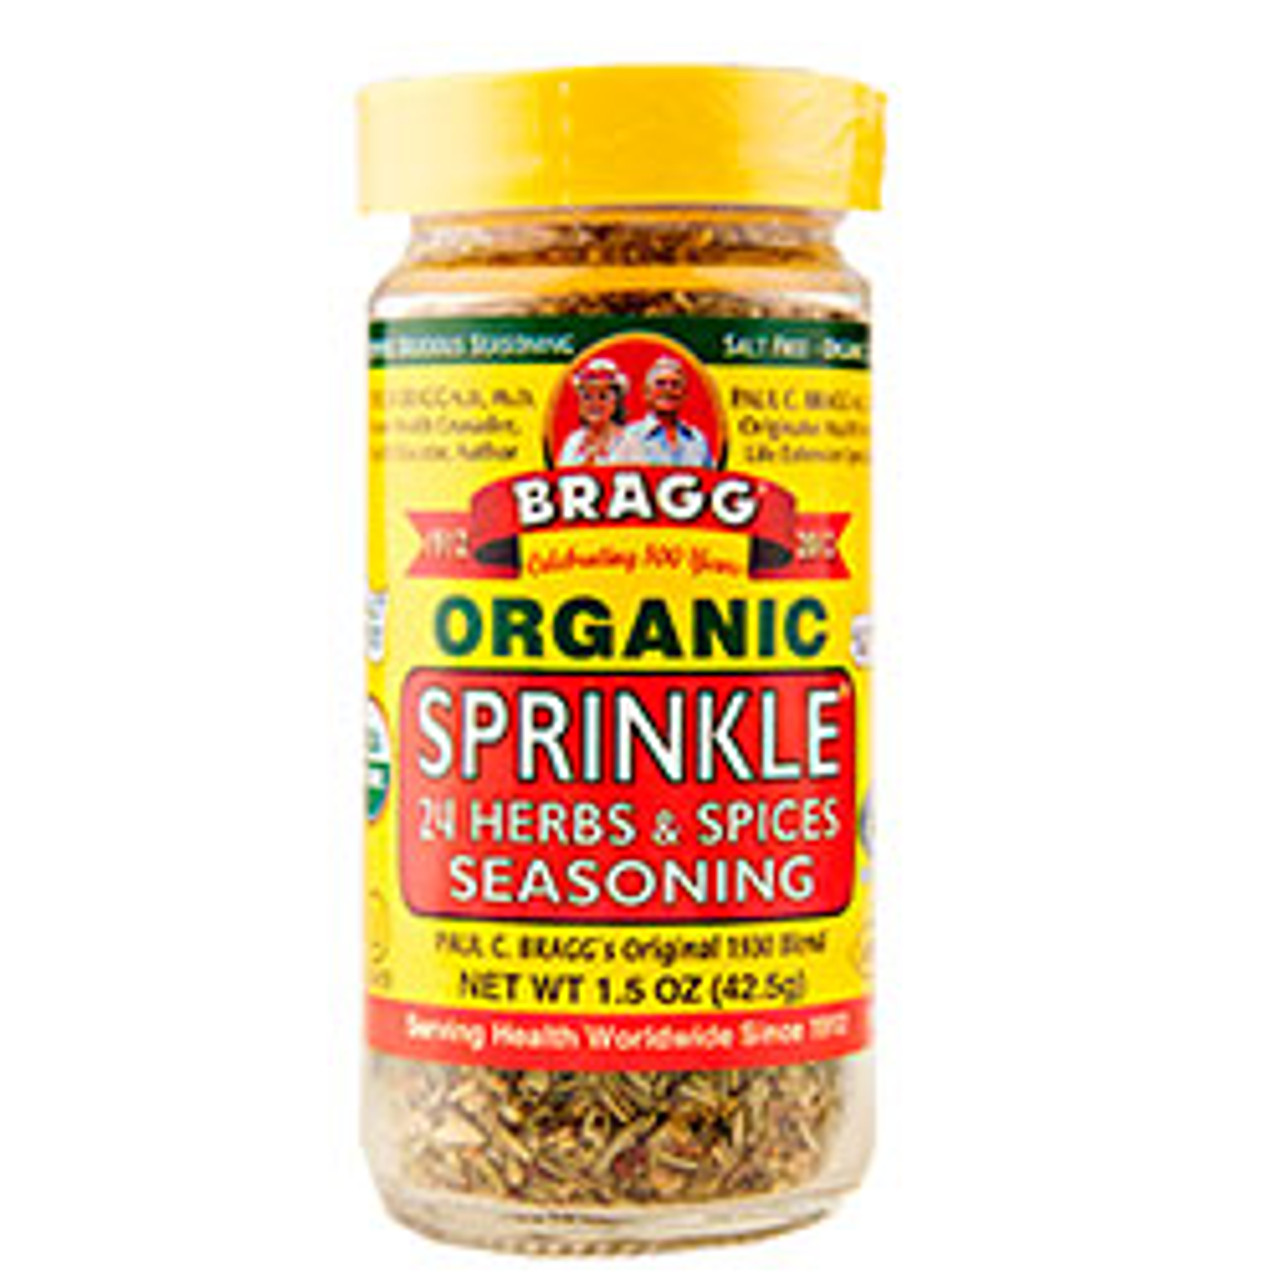 Bragg Sprinkle 24 Herb and Spice Seasoning REVIEW 